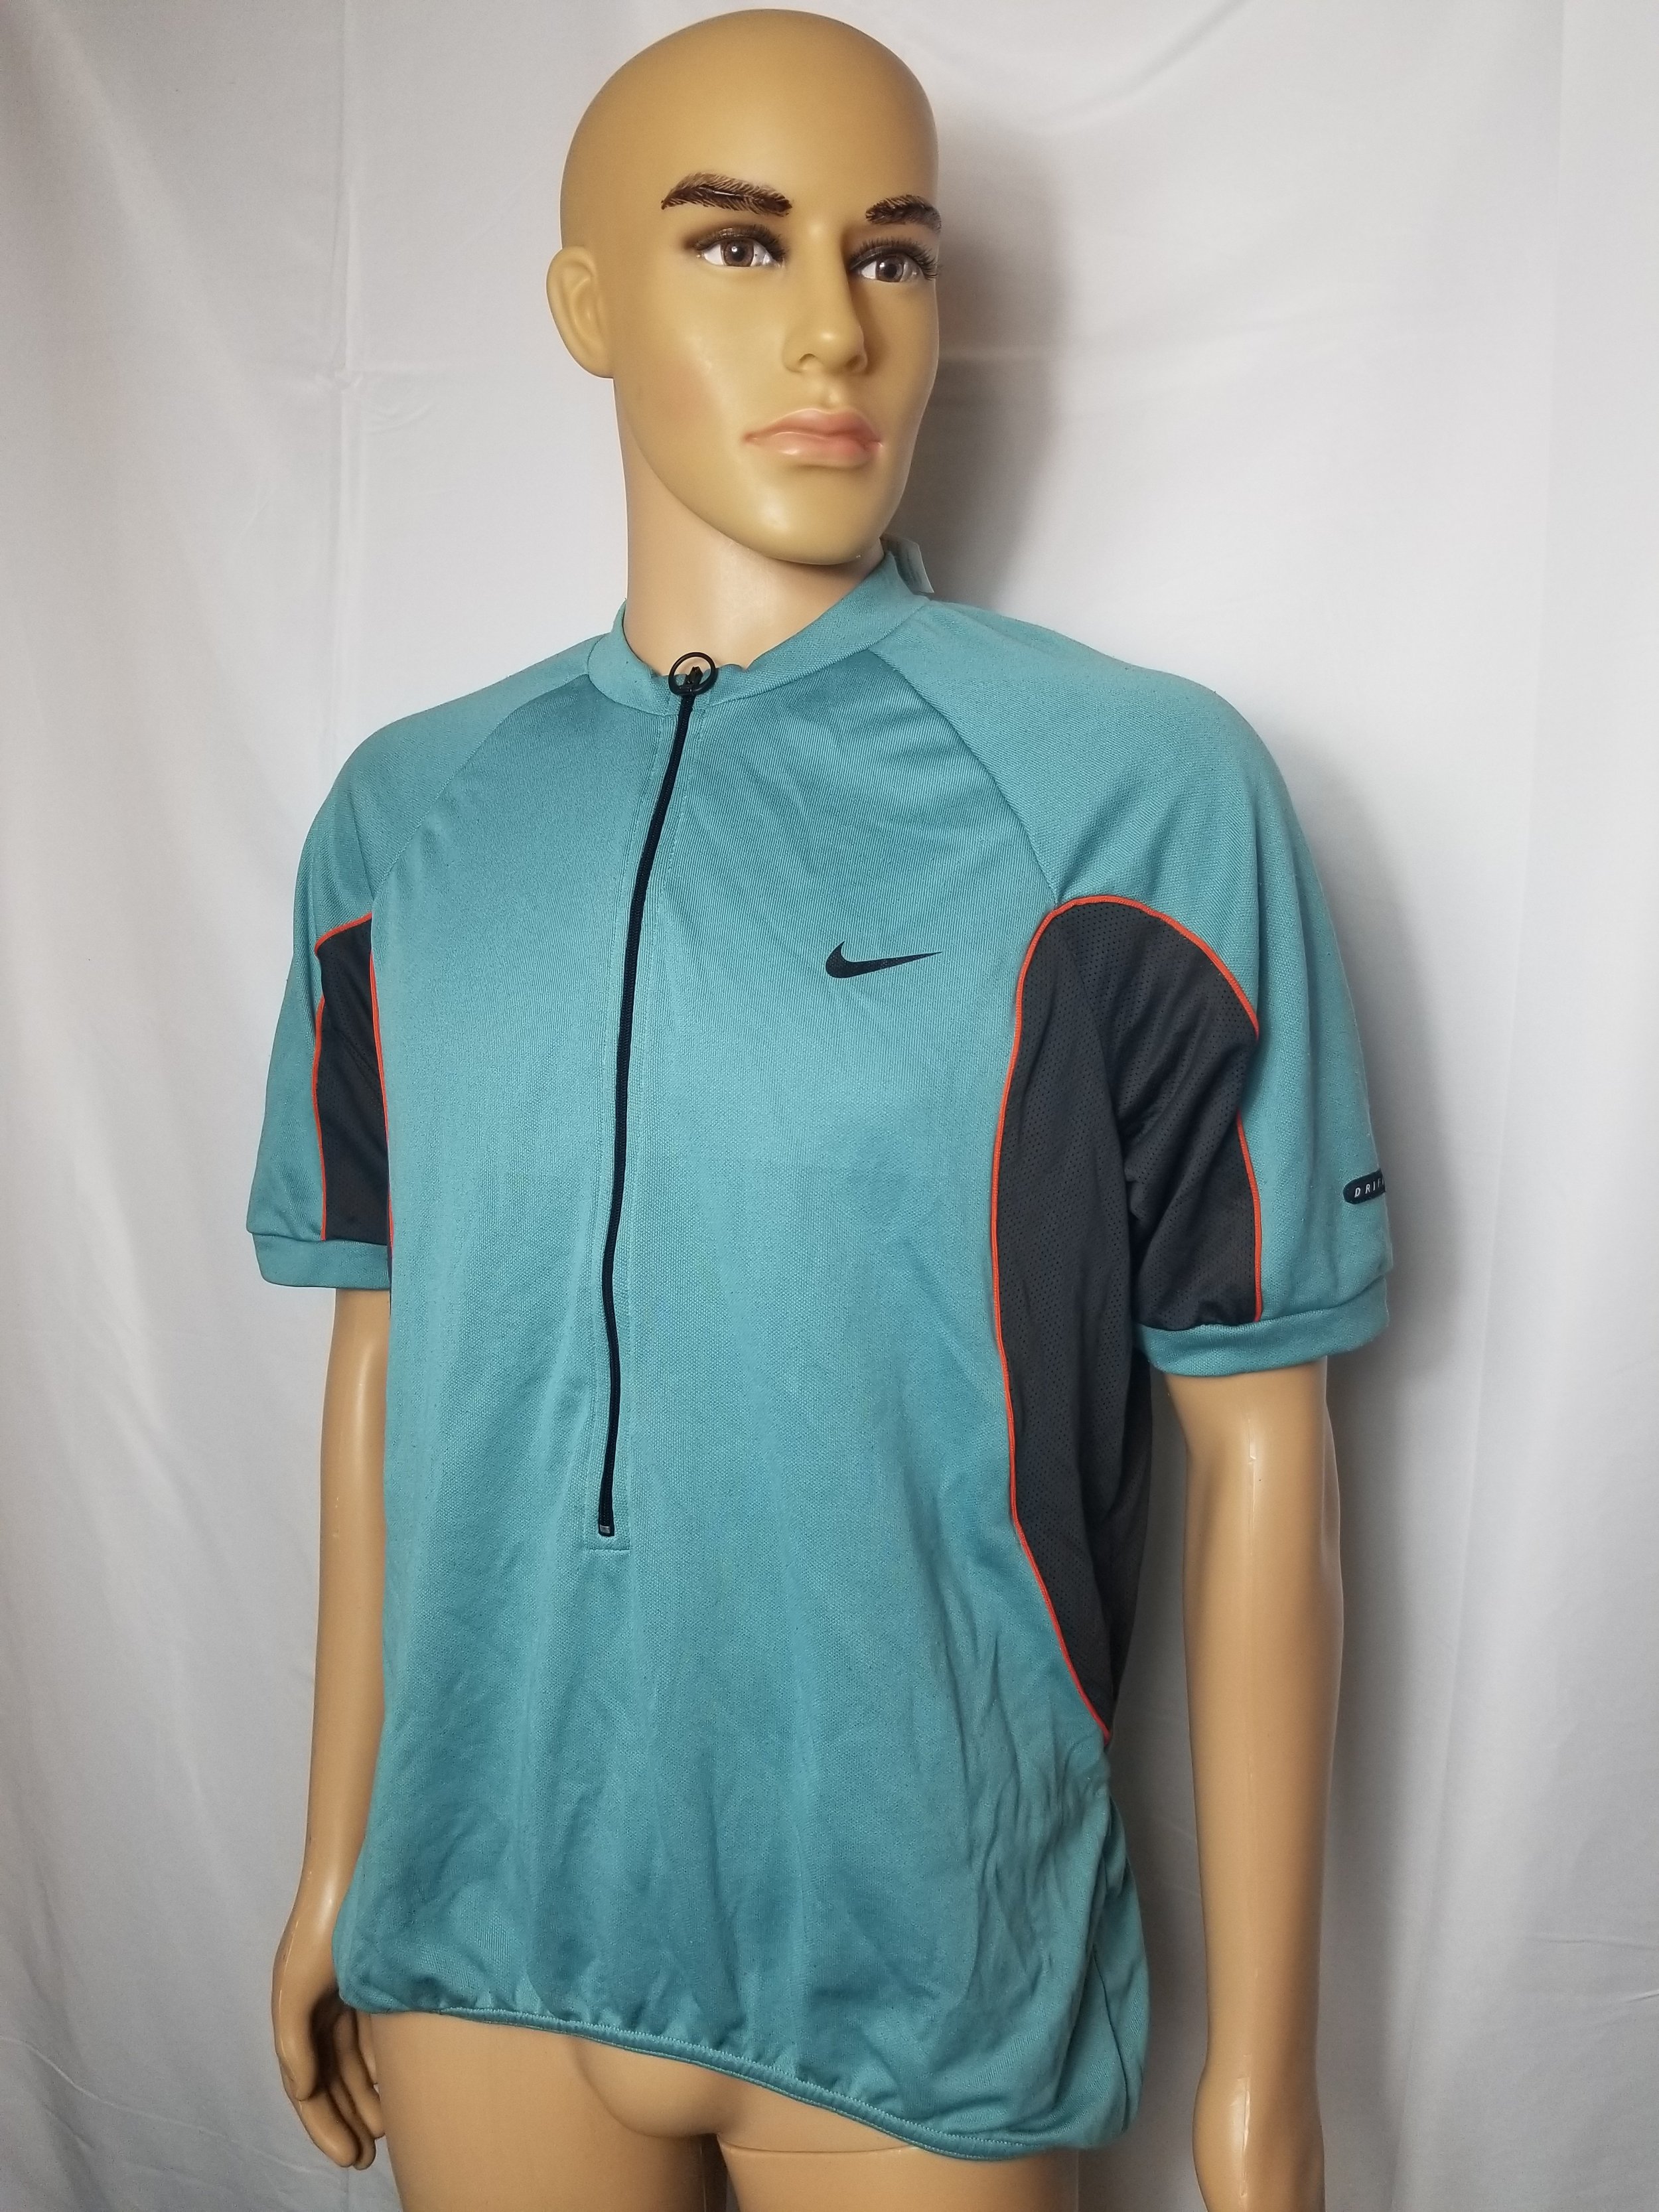 Vintage Nike ACG 90s made in USA Blue cycling jersey size xl Retro